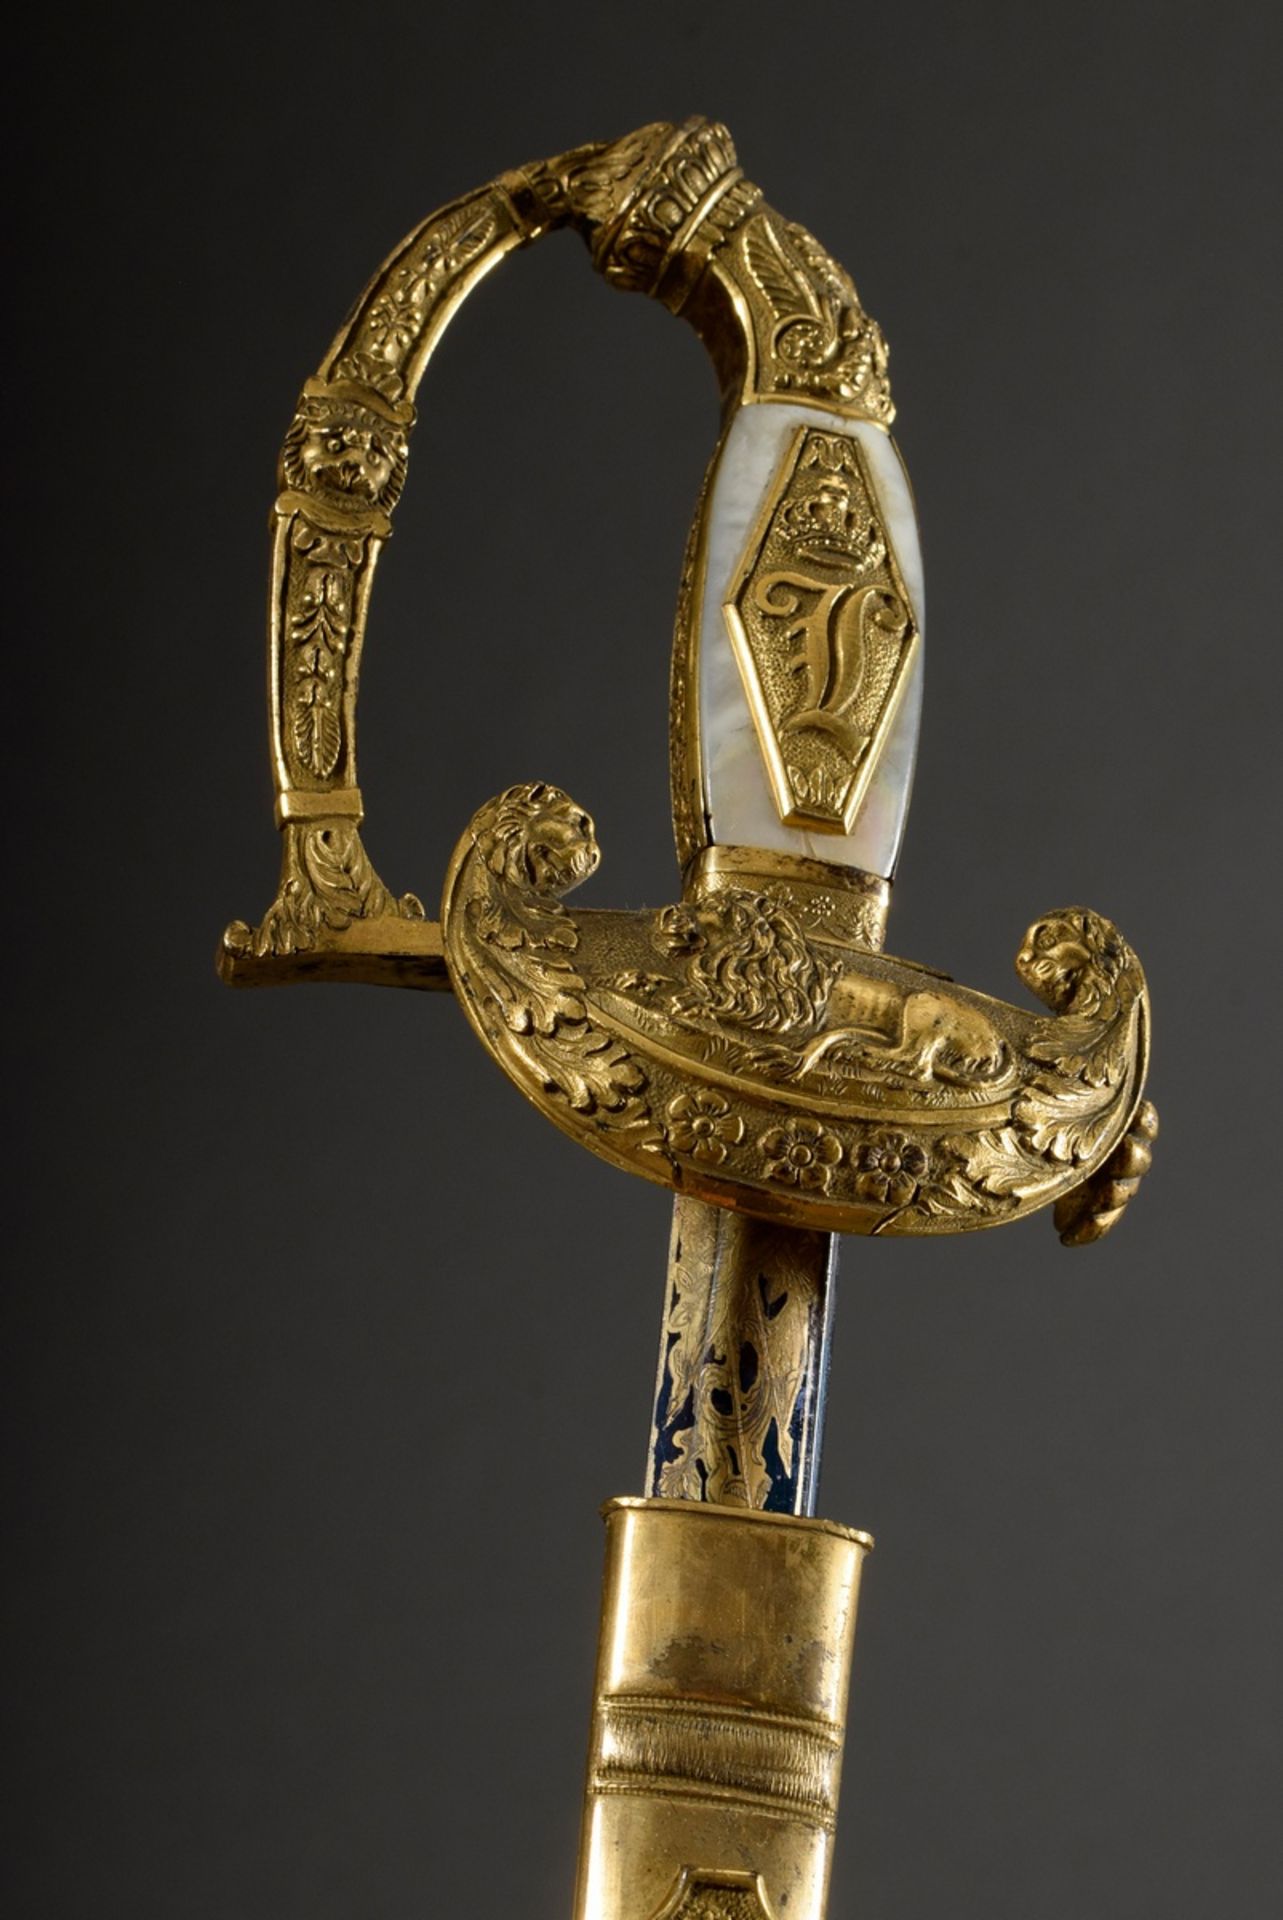 Bavarian civil servant's sword from the reign of King Ludwig I (1825-1848) or King Ludwig II (1864- - Image 8 of 11